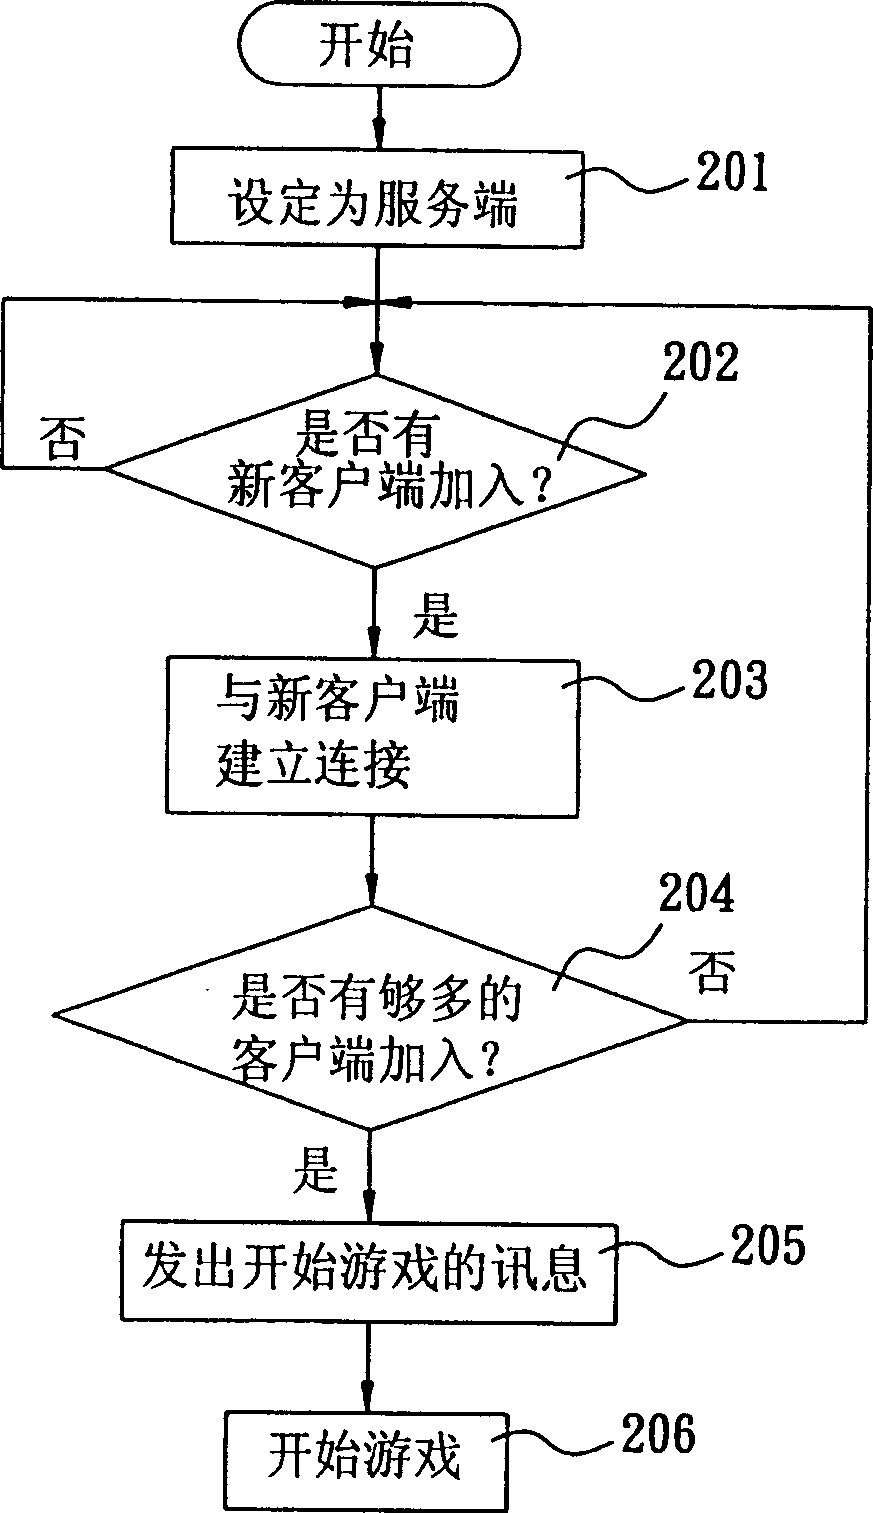 Method of playing radio networking game in hand-held game set via blue-tooth communication technology